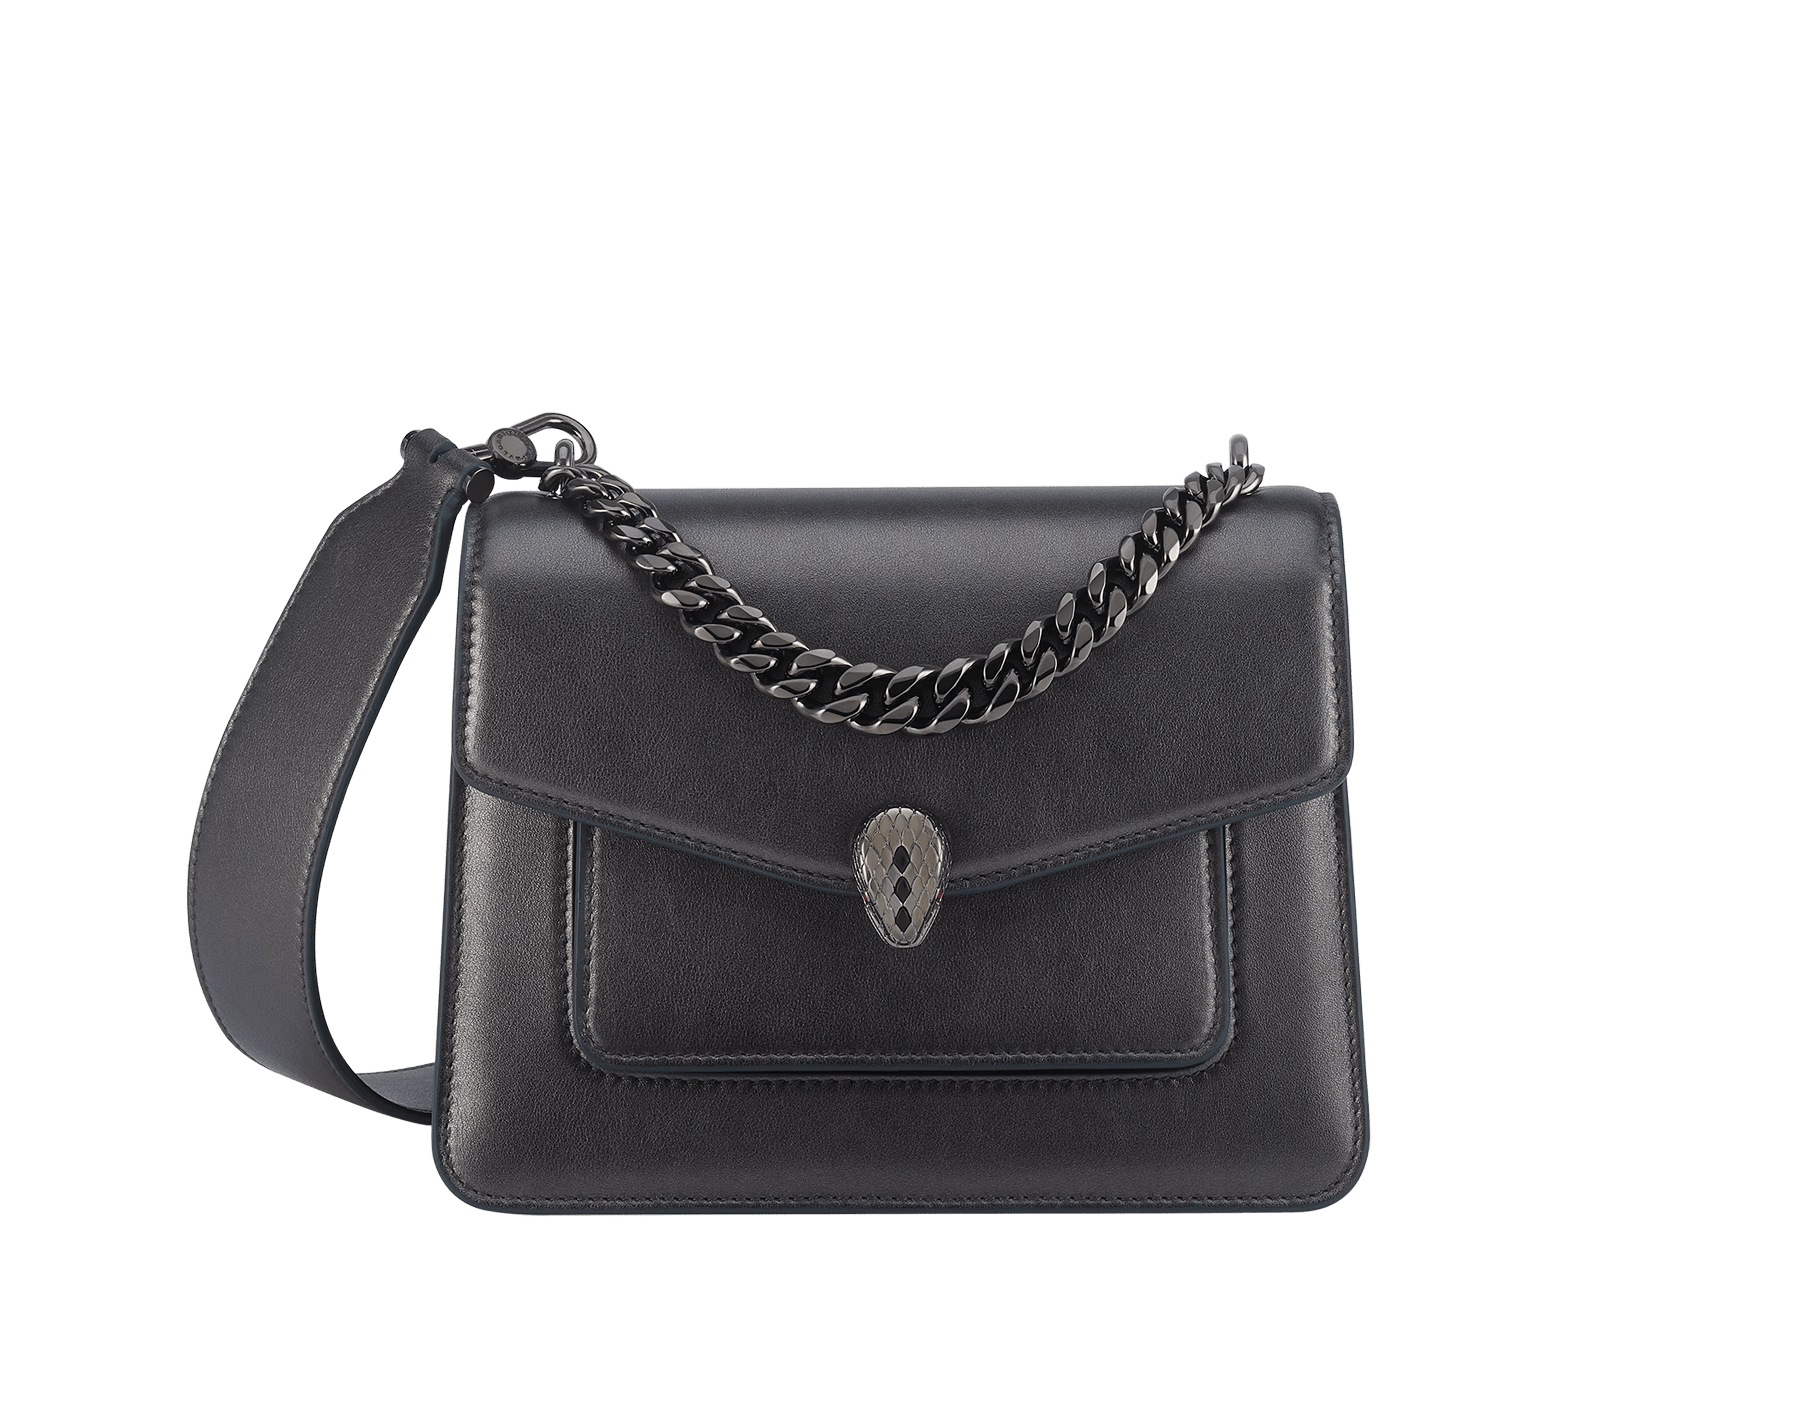 Serpenti Forever Maxi Chain small crossbody bag in flash diamond white grained calf leather with foggy opal grey nappa leather lining. Captivating snakehead magnetic closure in gold-plated brass embellished with white mother-of-pearl scales and red enamel eyes. 1134-MCGC image 1